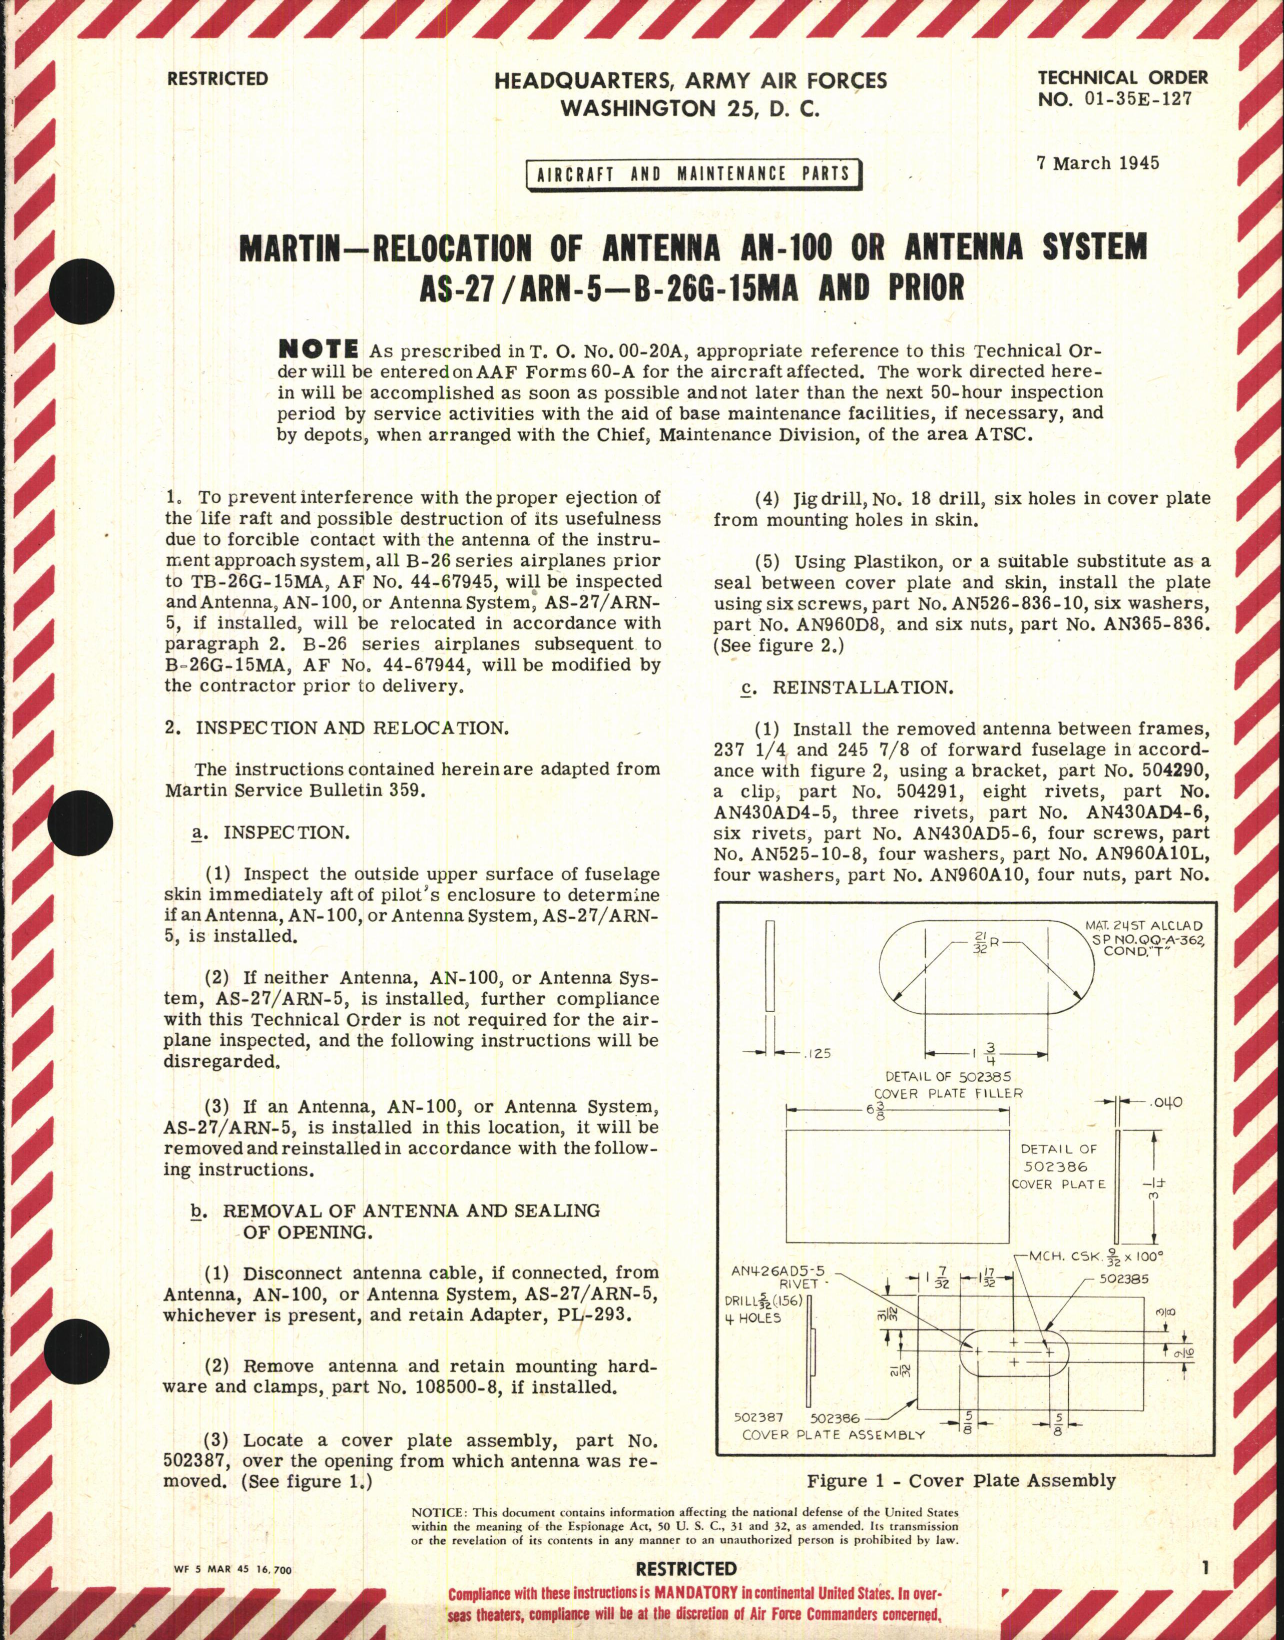 Sample page 1 from AirCorps Library document: Relocation of Antenna AN-100 or Antenna System AS-27 / ARN-5 for B-26G-15MA and Prior